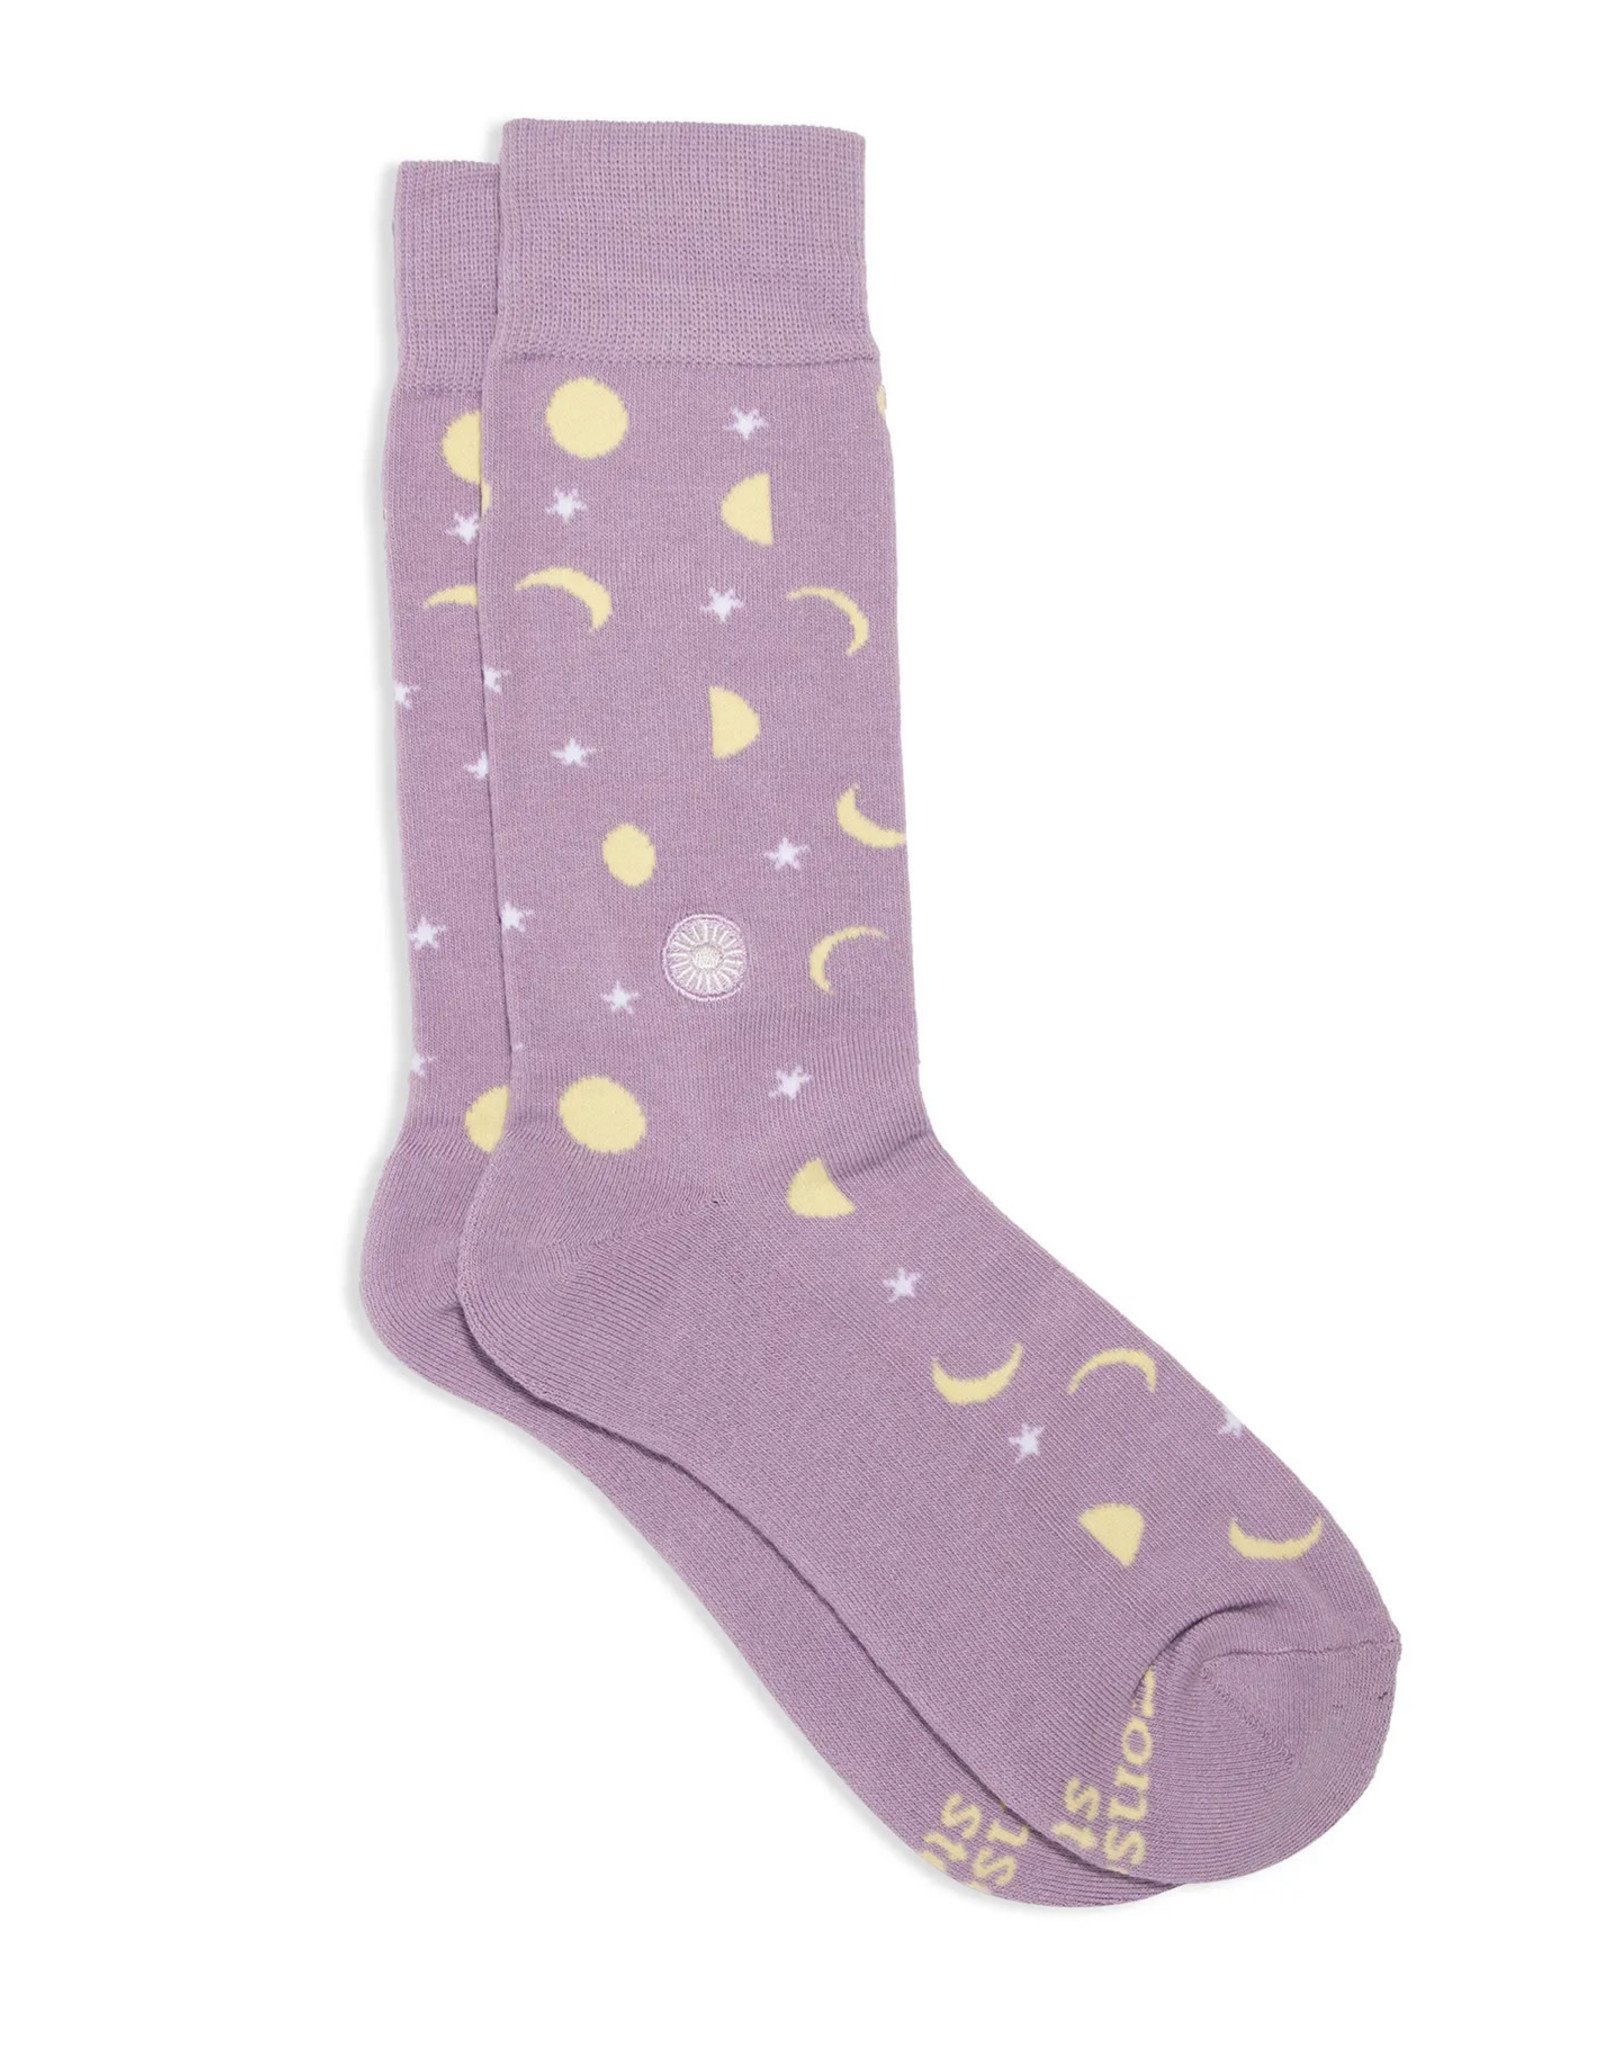 Conscious Step Socks that Support Mental Health Lavender